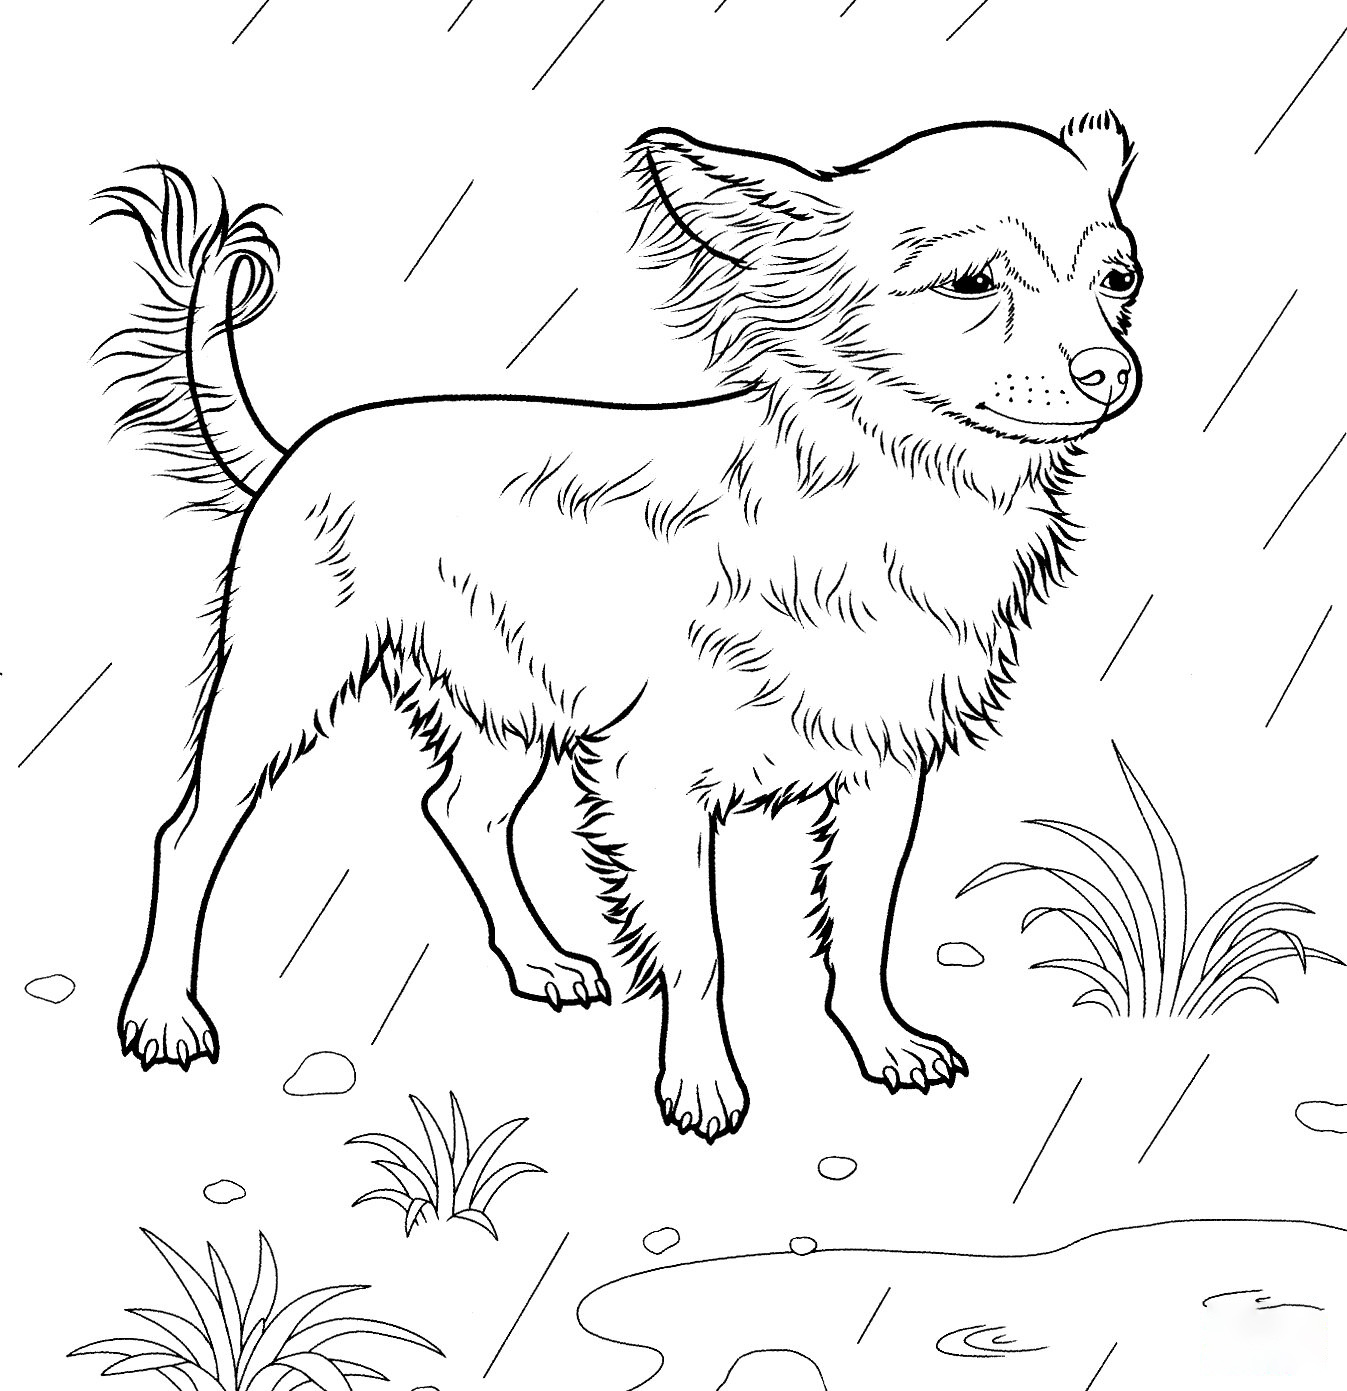 Chihuahua Coloring Page